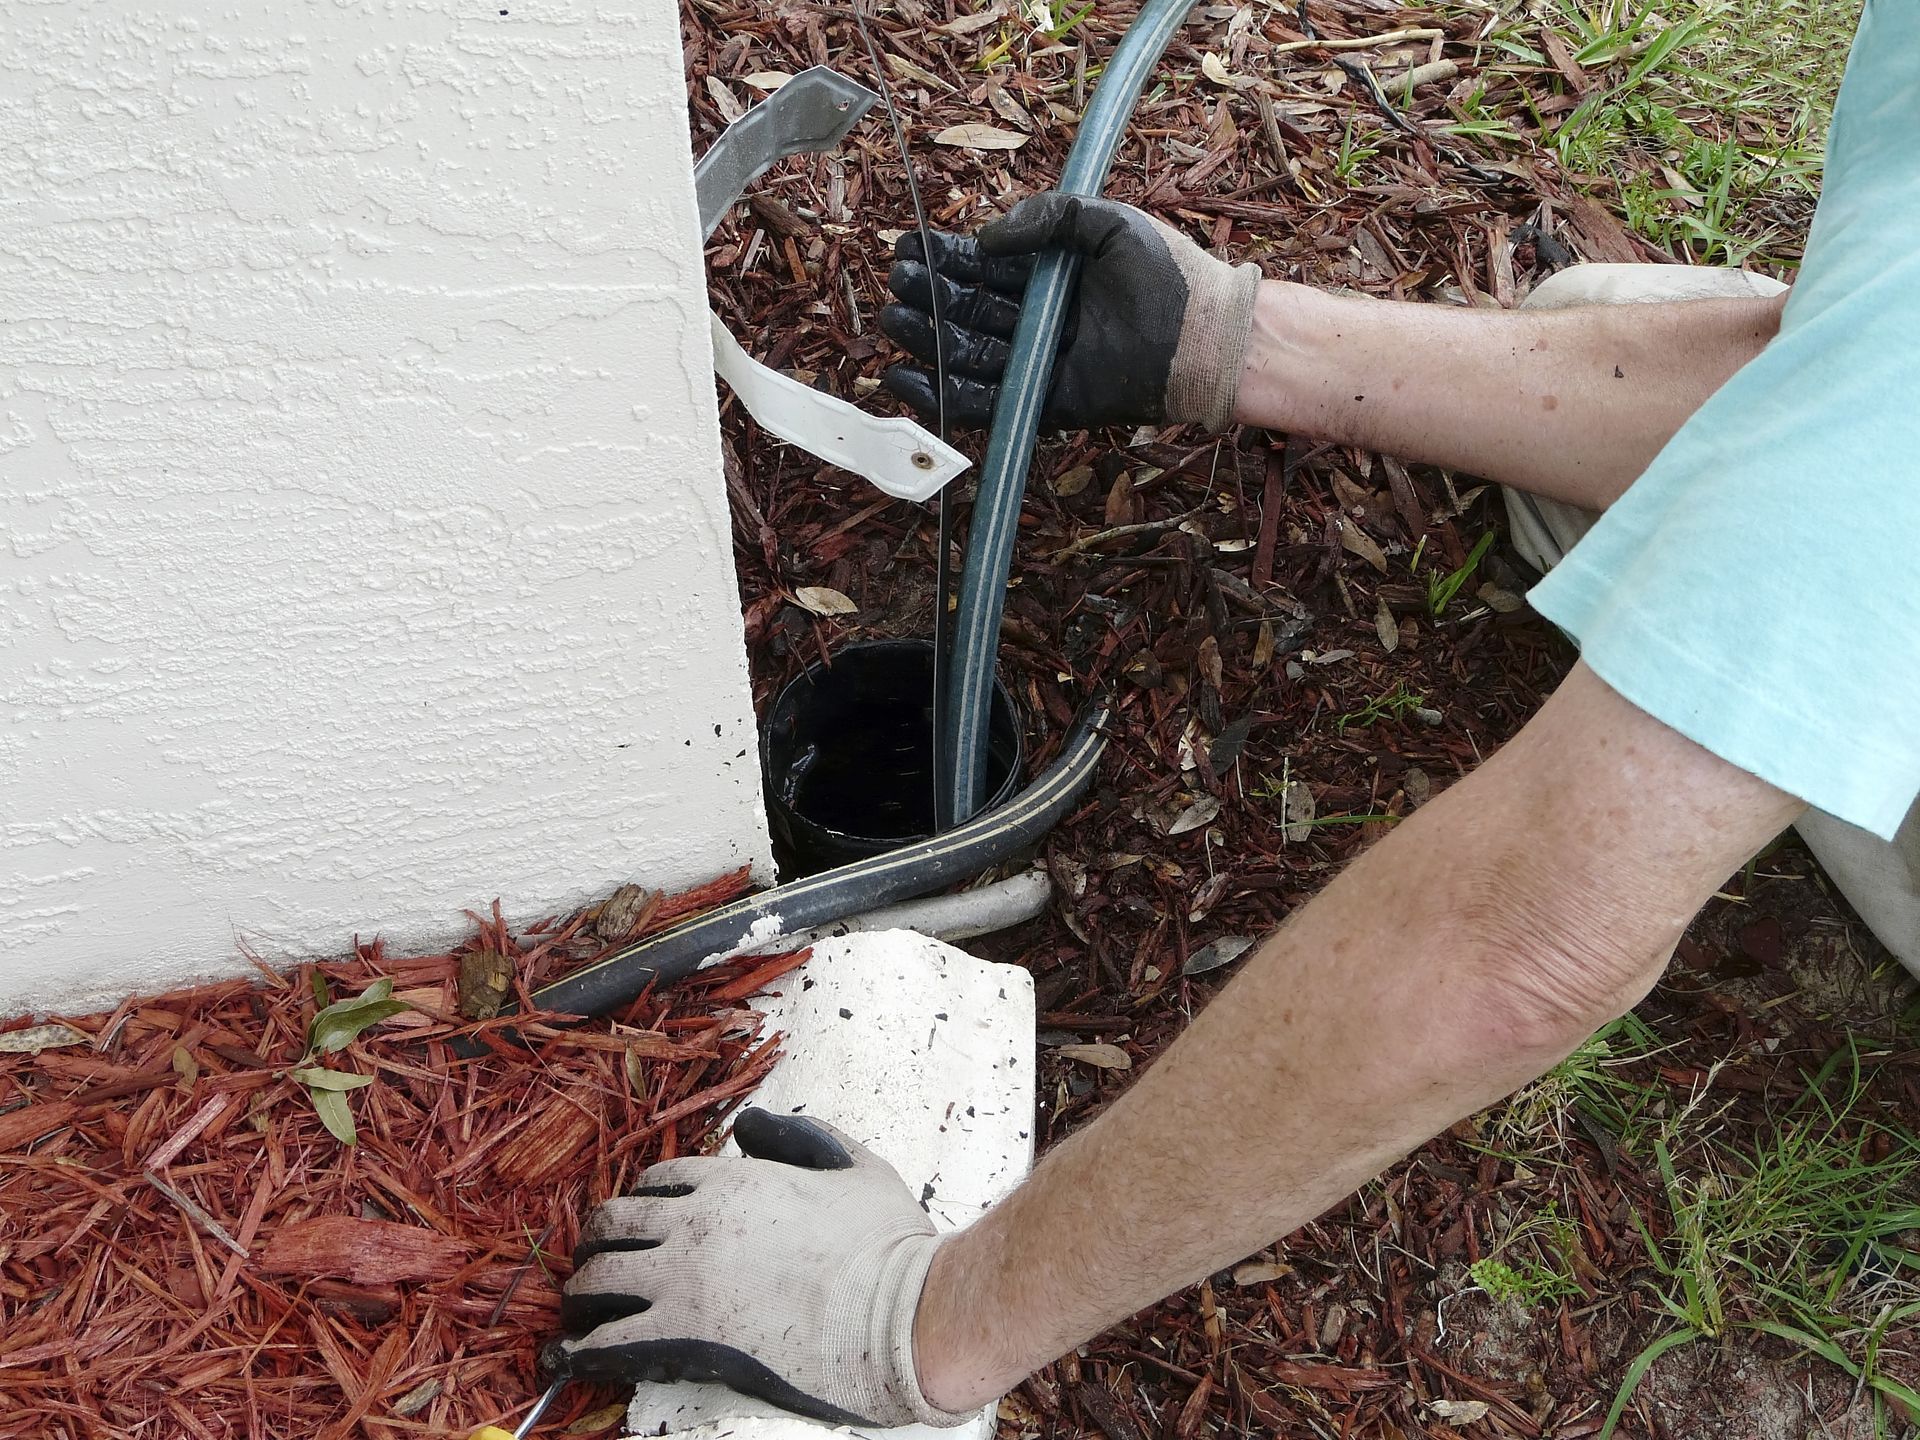 Plumber using a sewer rod to clear a blockage in a drainpipe.